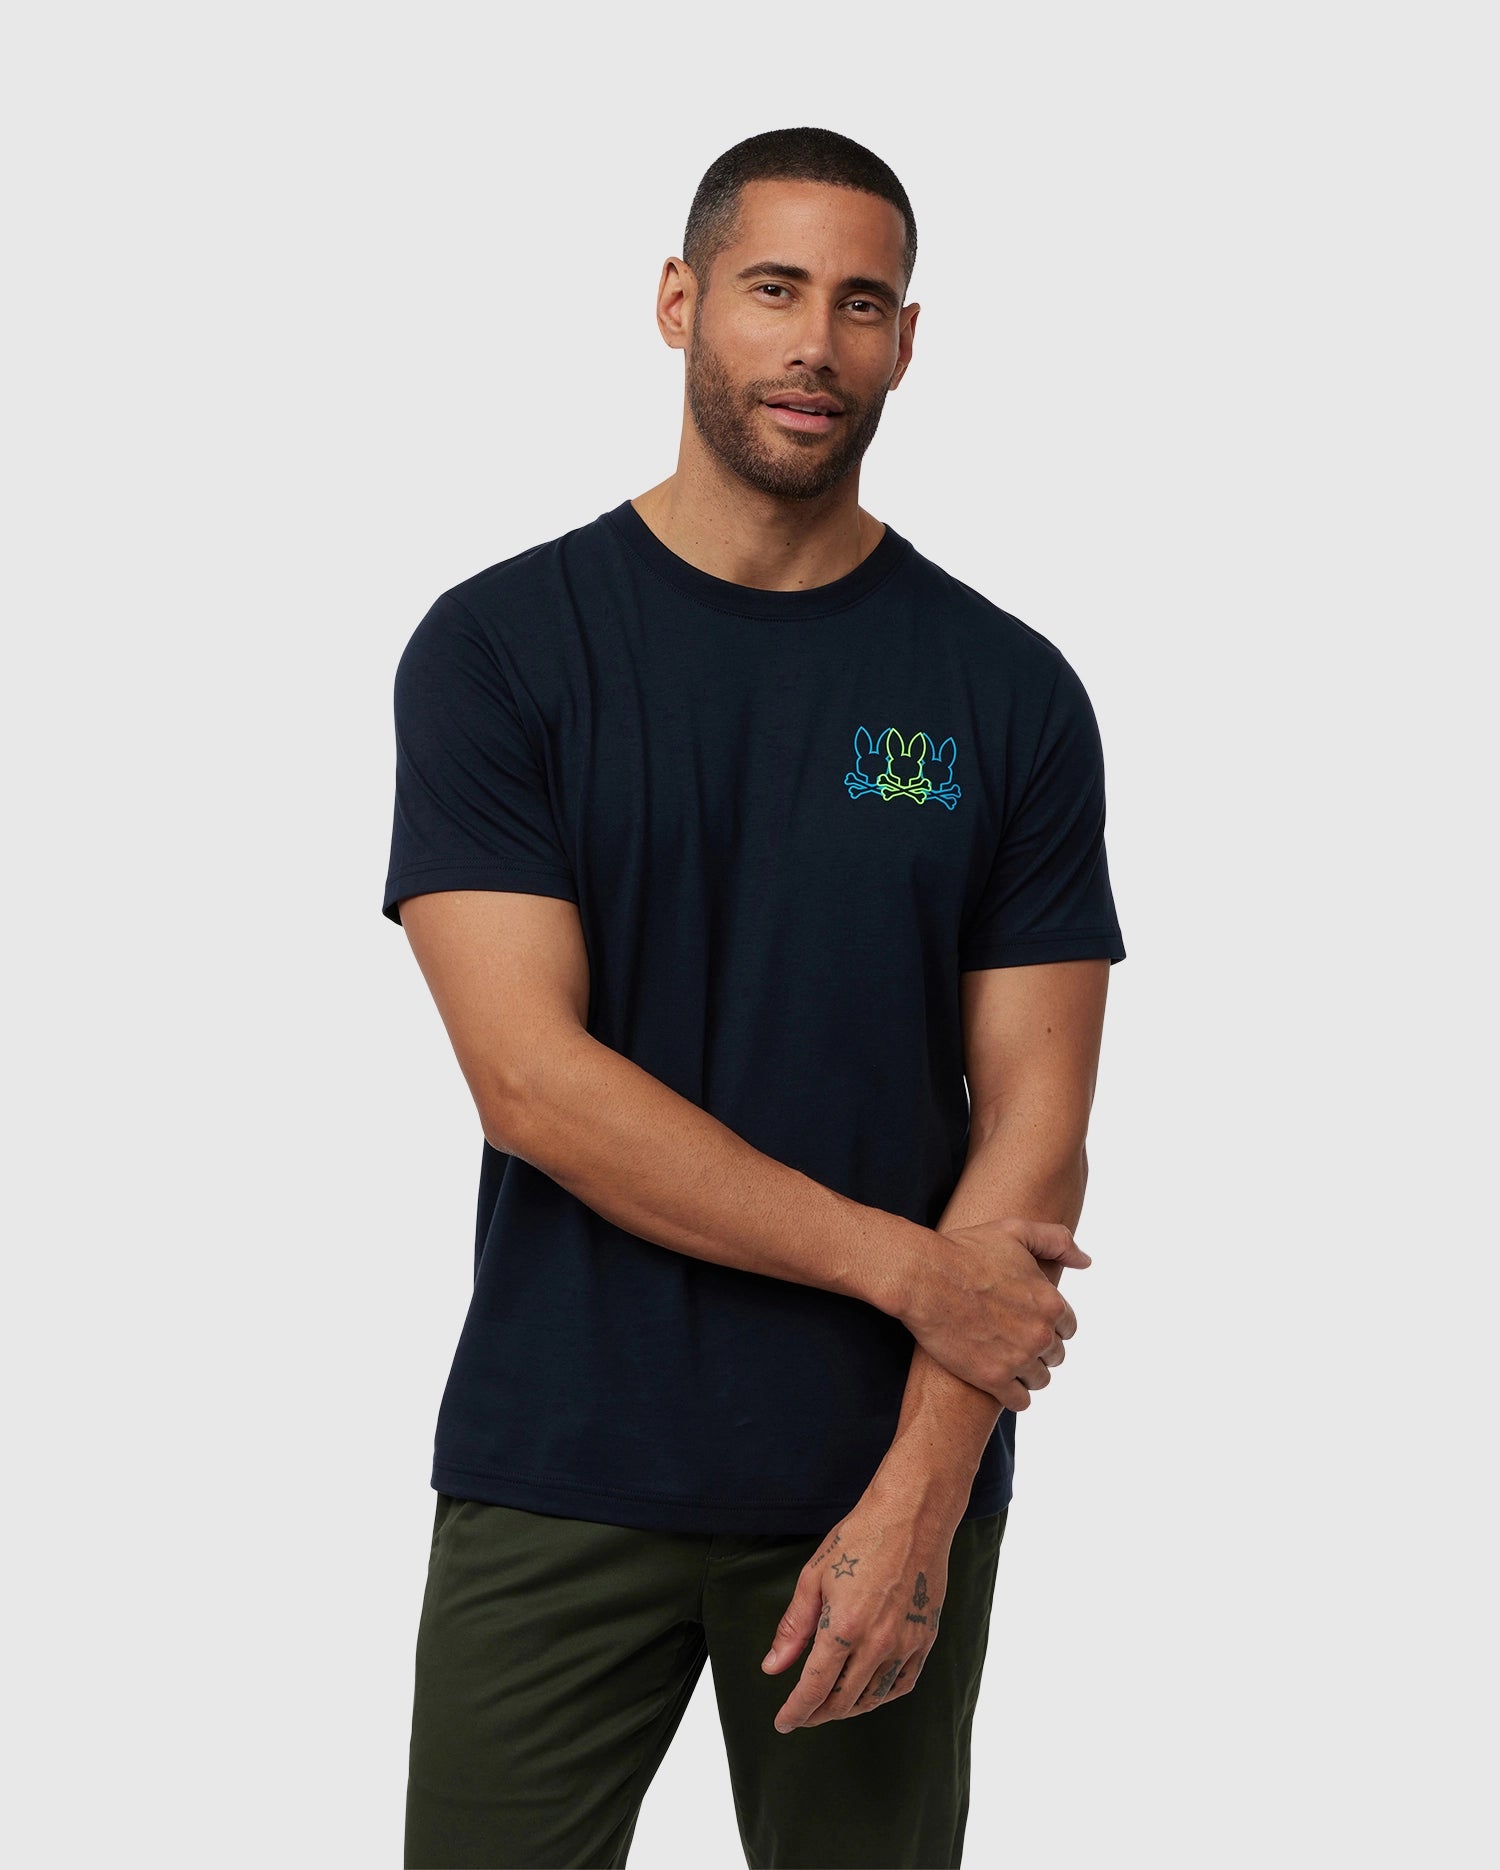 A man in a navy blue Psycho Bunny Pompey graphic tee with a small green emblem on the chest stands with arms crossed, wearing olive pants, on a plain background.